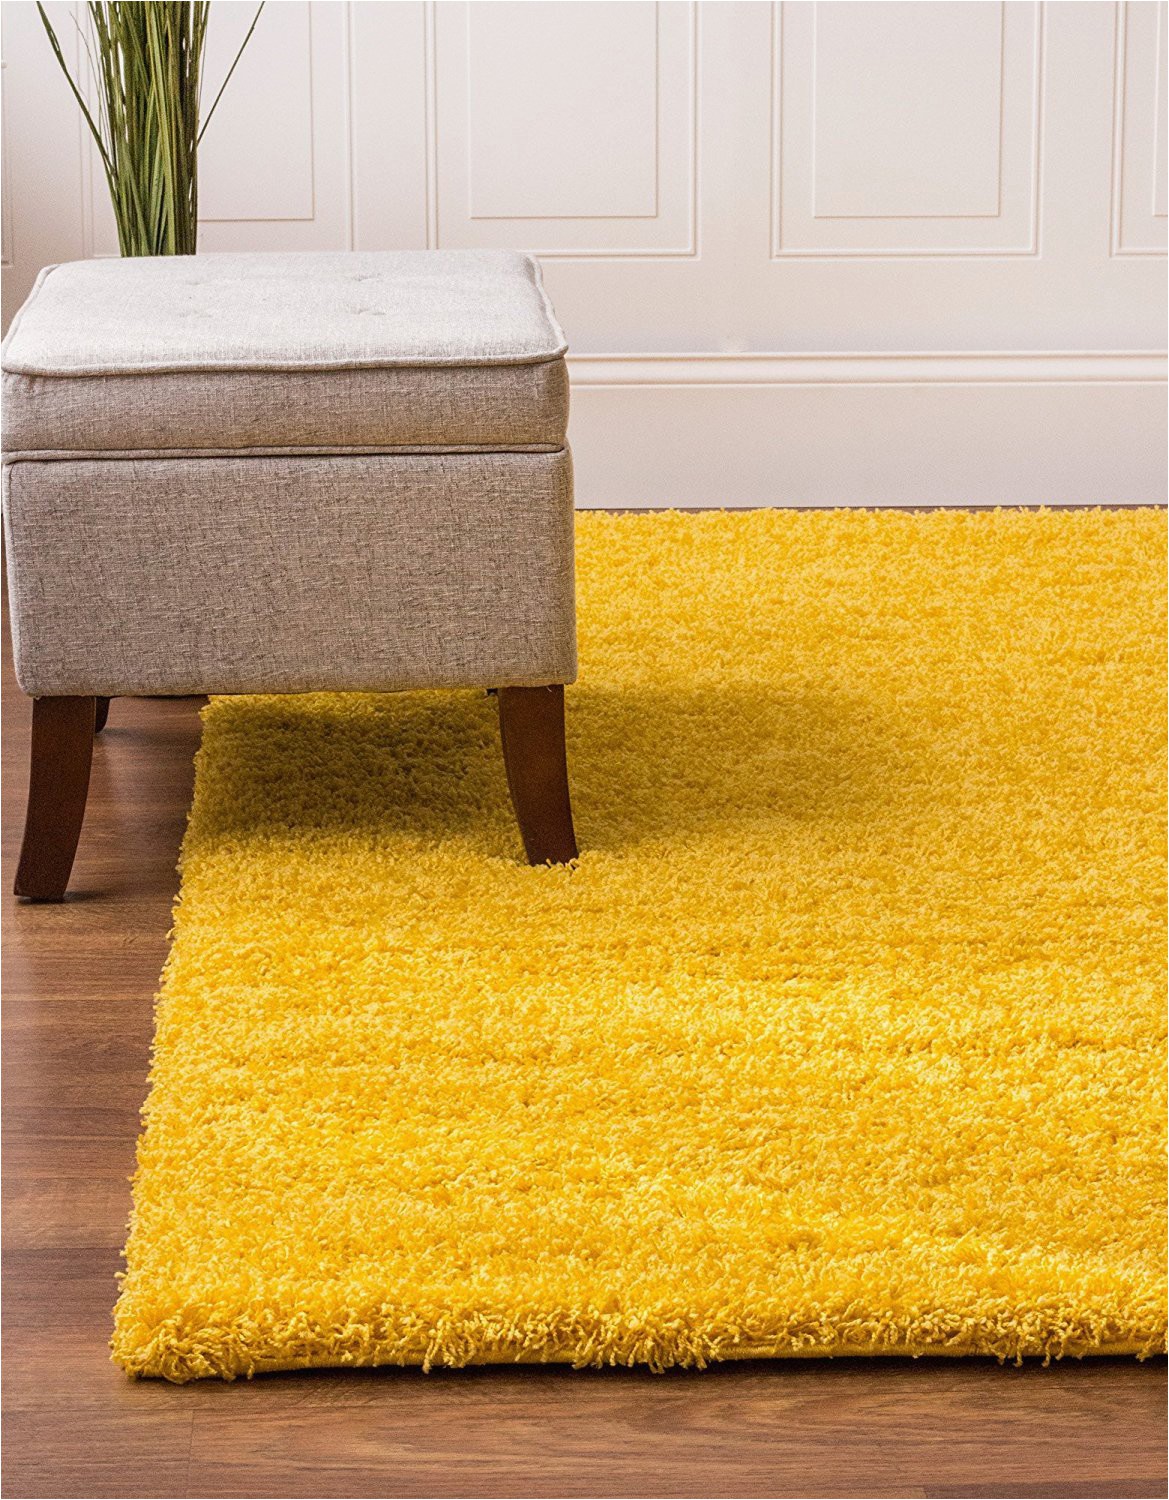 Large Thick soft area Rugs Bravich Rugmasters Yellow Mustard Rug 5 Cm Thick Shag Pile soft Shaggy area Rugs Modern Carpet Living Room Bedroom…